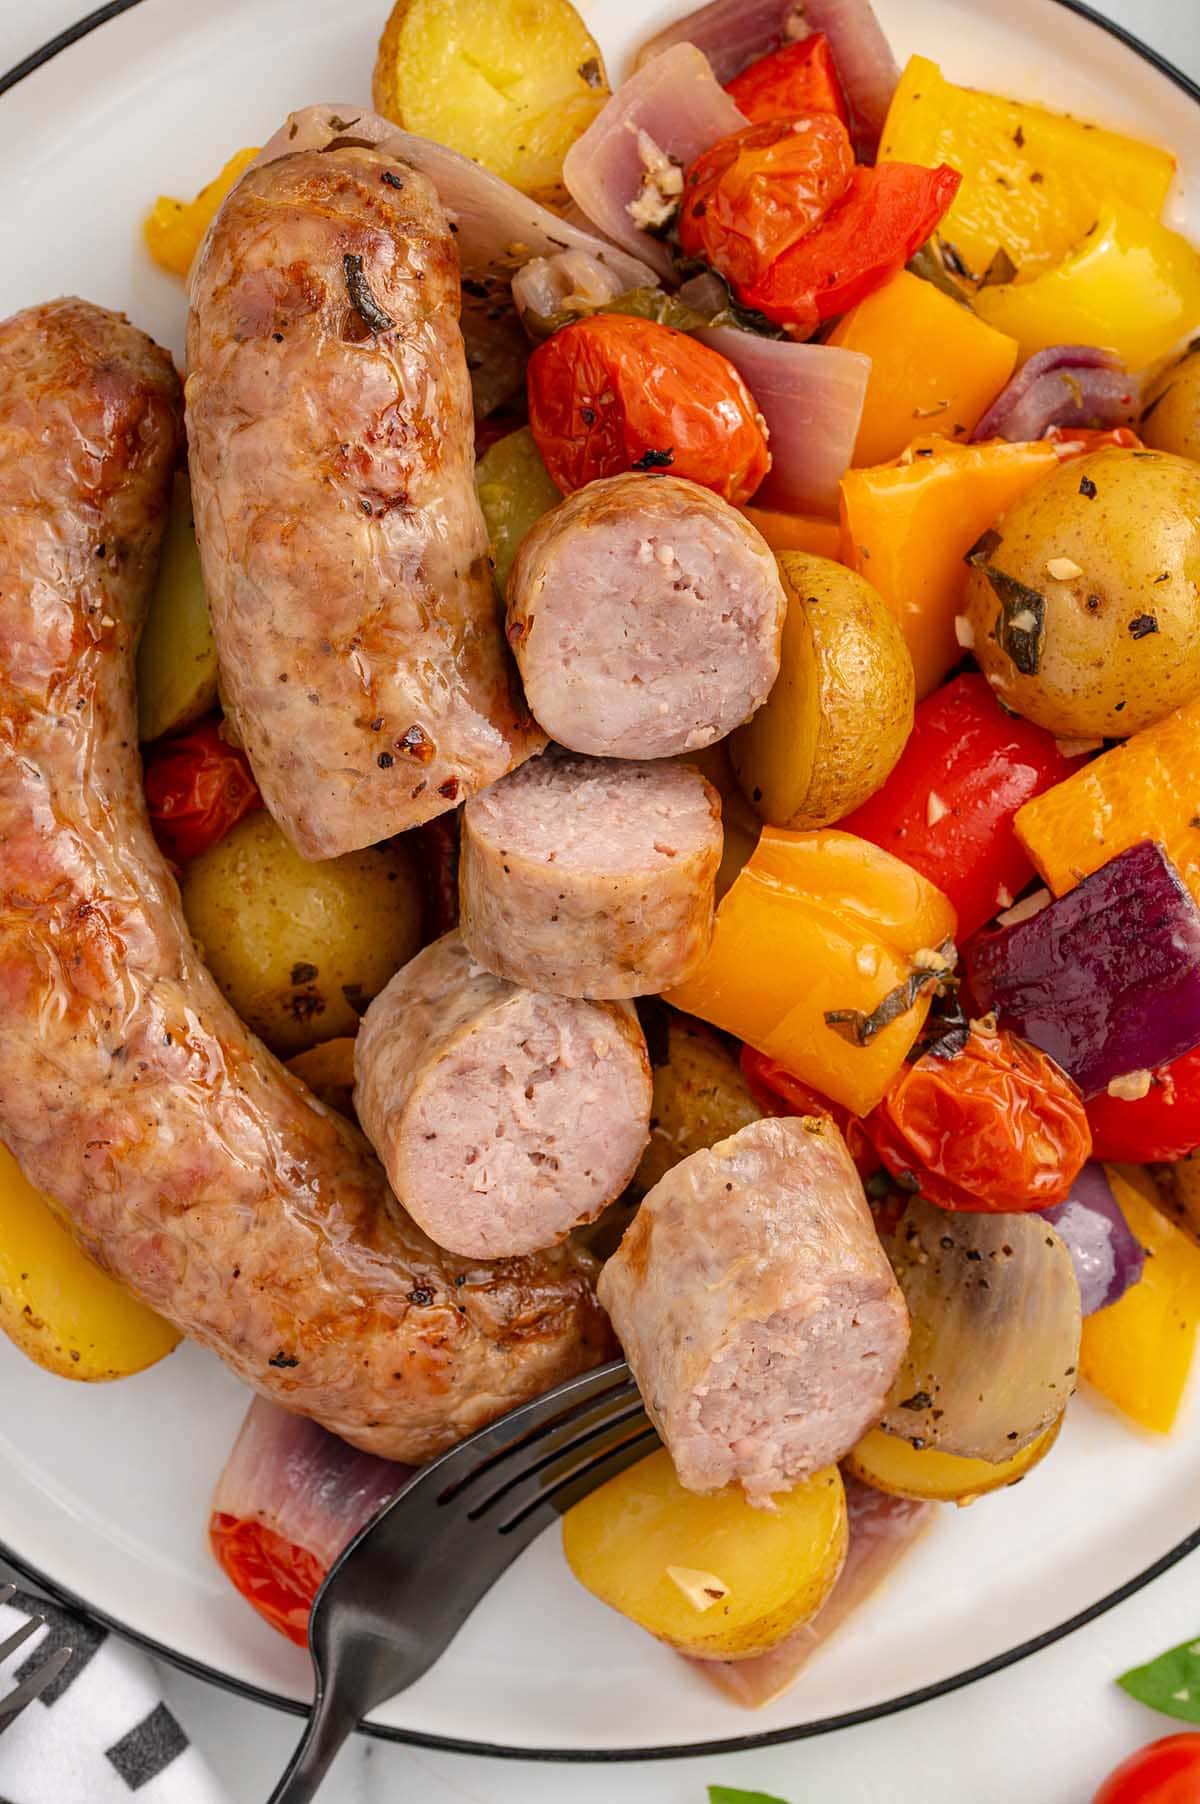 Baked Italian Sausage cut into pieces with vegetables on the plate.